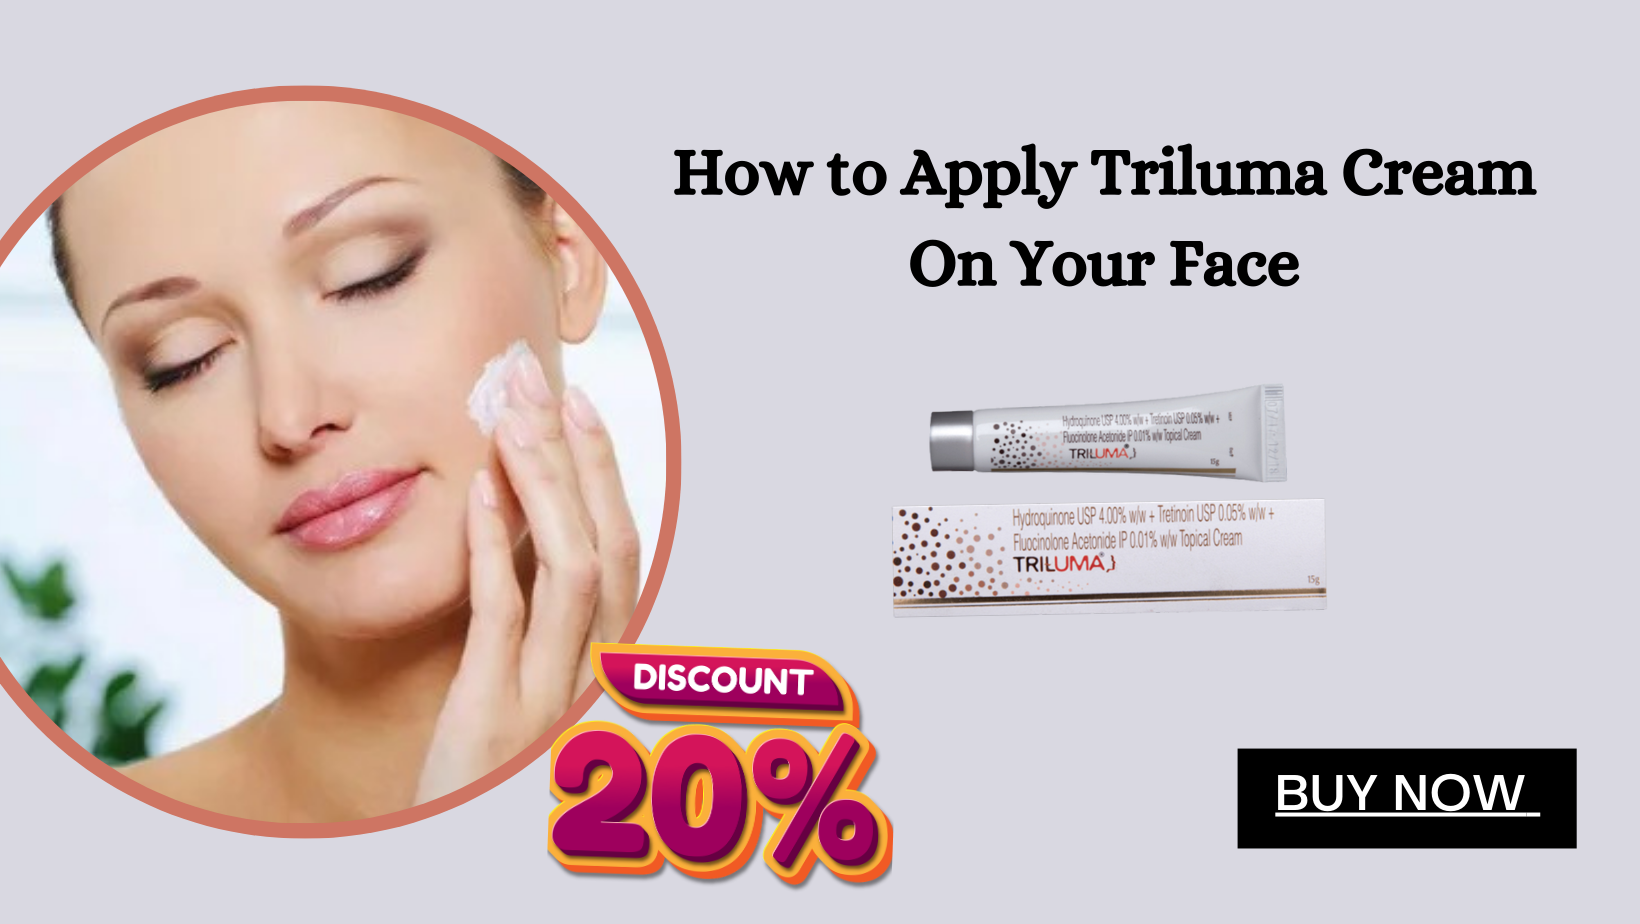 How to Apply Triluma Cream on Your Face - Mastering the Art